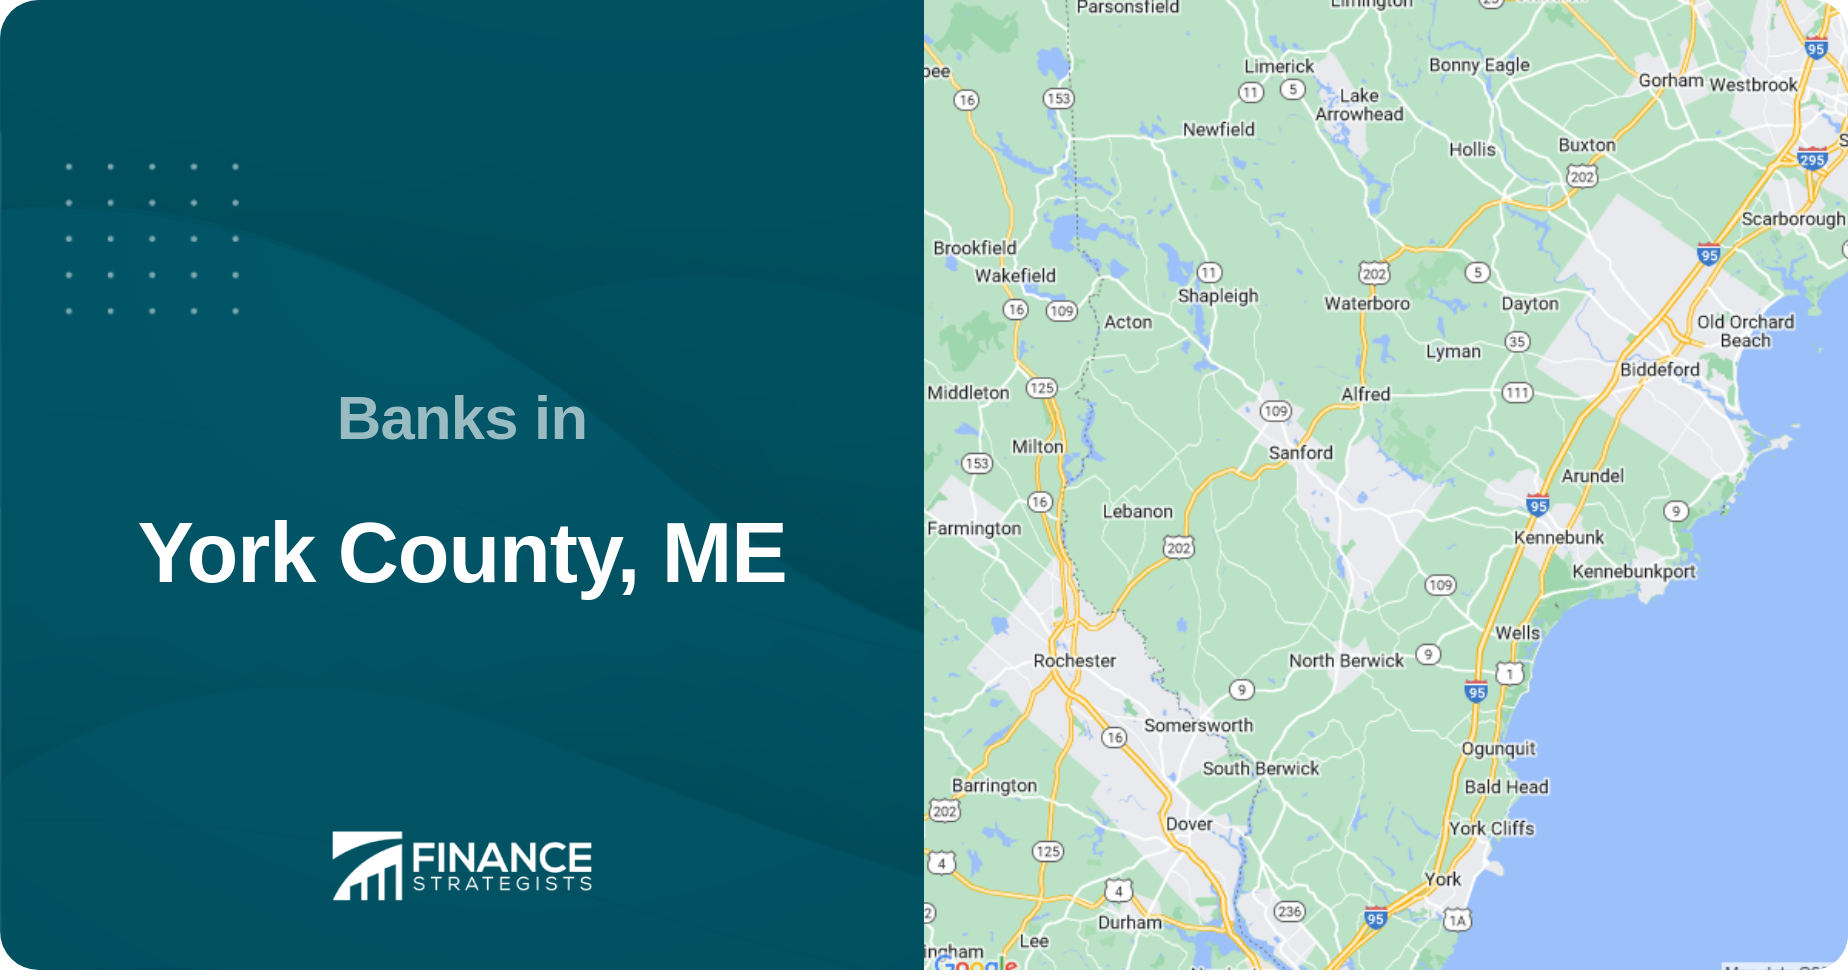 Banks in York County, ME